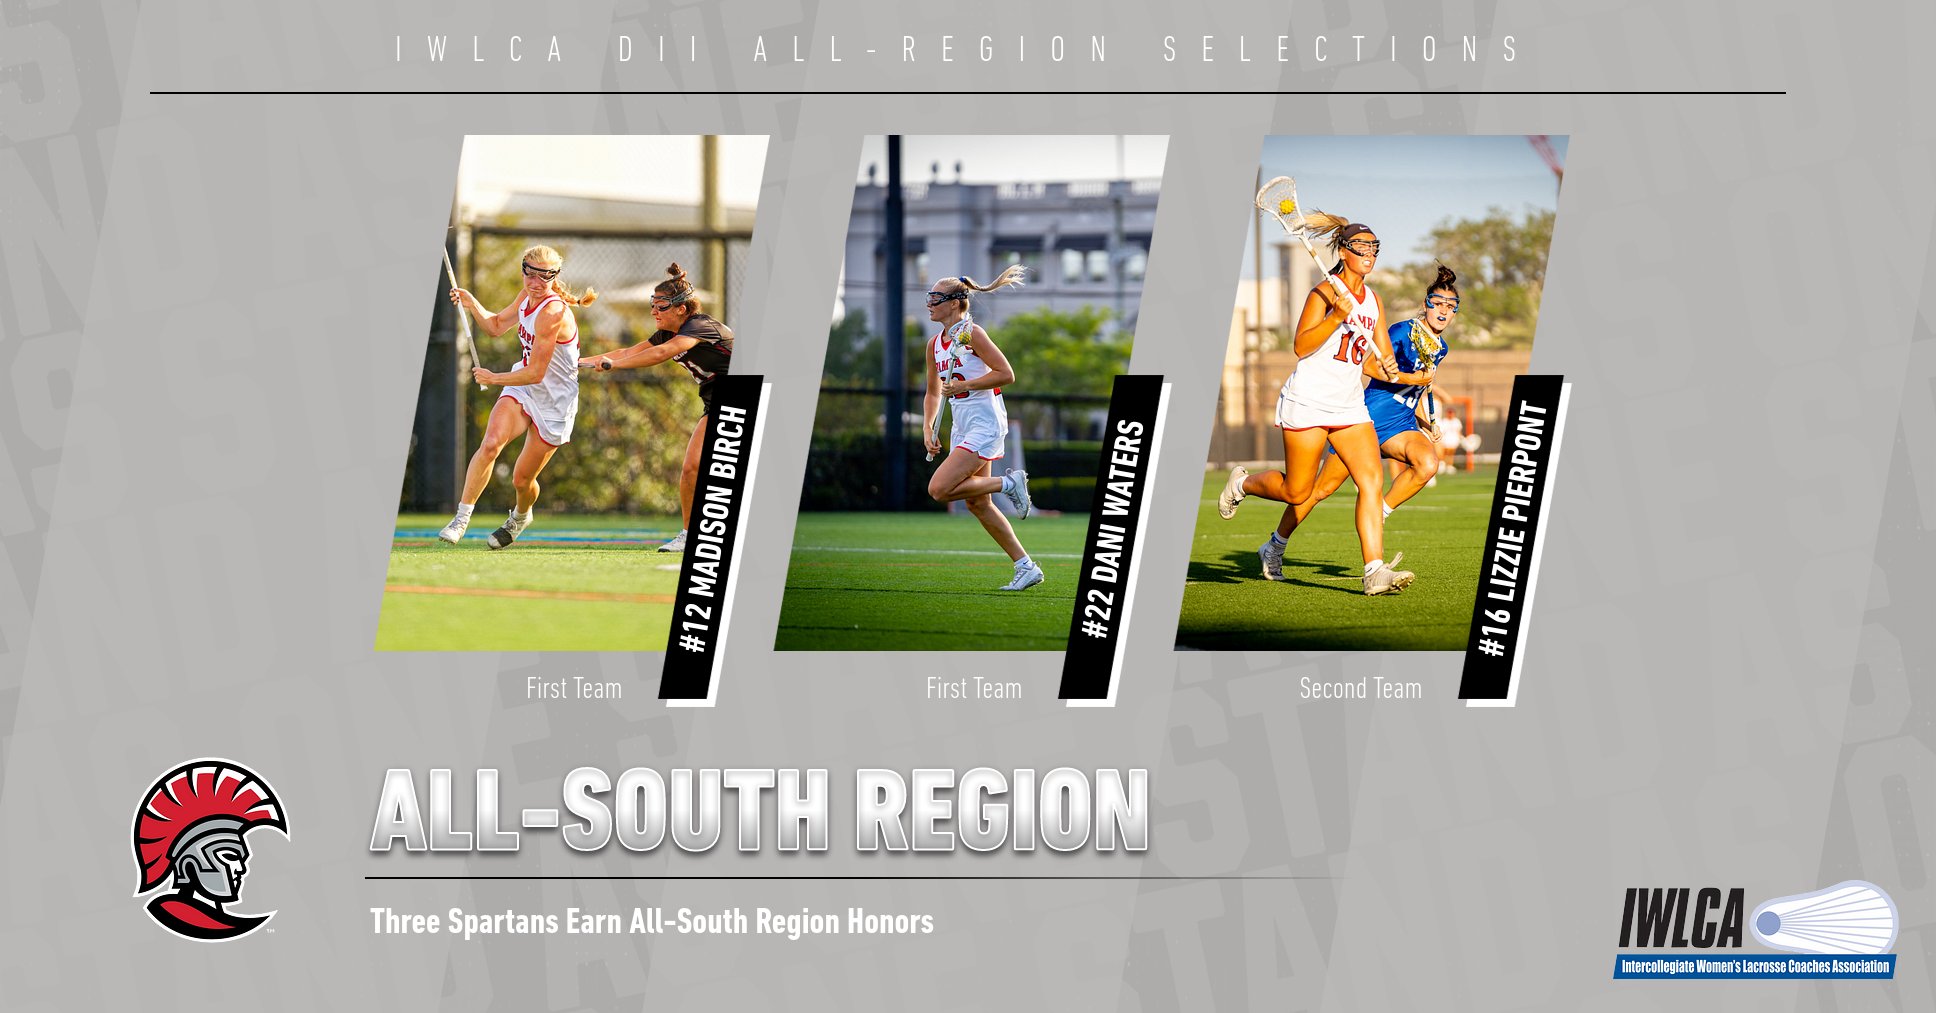 Birch, Pierpont and Waters Named to IWLCA All-South Region Teams